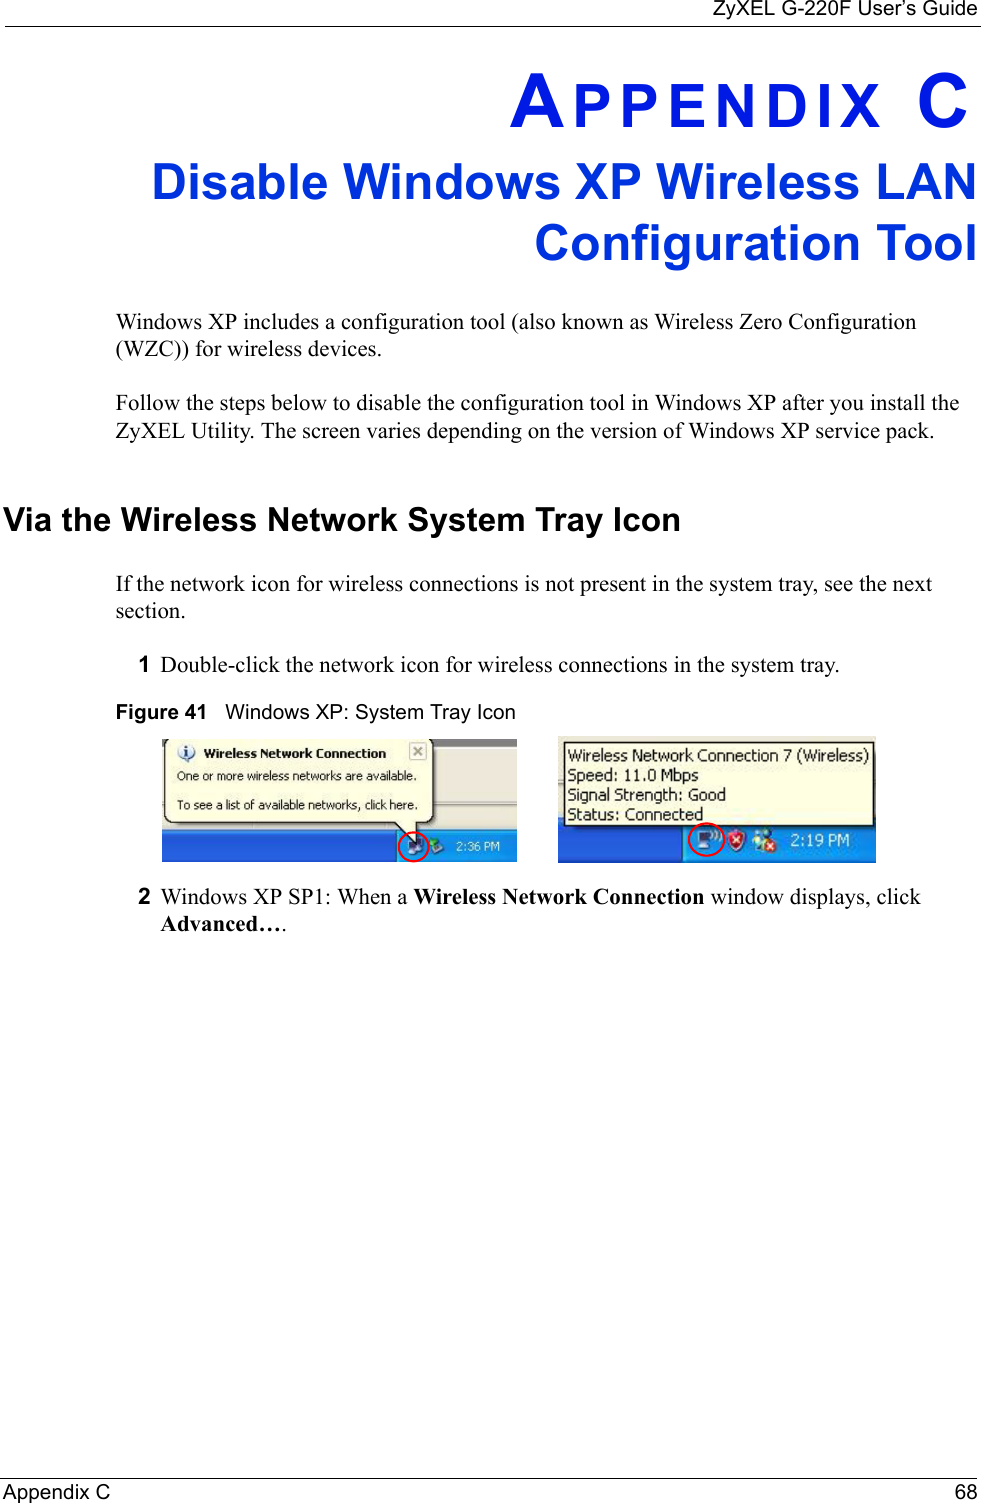 ZyXEL G-220F User’s GuideAppendix C  68APPENDIX CDisable Windows XP Wireless LAN Configuration ToolWindows XP includes a configuration tool (also known as Wireless Zero Configuration (WZC)) for wireless devices. Follow the steps below to disable the configuration tool in Windows XP after you install the ZyXEL Utility. The screen varies depending on the version of Windows XP service pack.Via the Wireless Network System Tray IconIf the network icon for wireless connections is not present in the system tray, see the next section.1Double-click the network icon for wireless connections in the system tray. Figure 41   Windows XP: System Tray Icon2Windows XP SP1: When a Wireless Network Connection window displays, click Advanced…. 